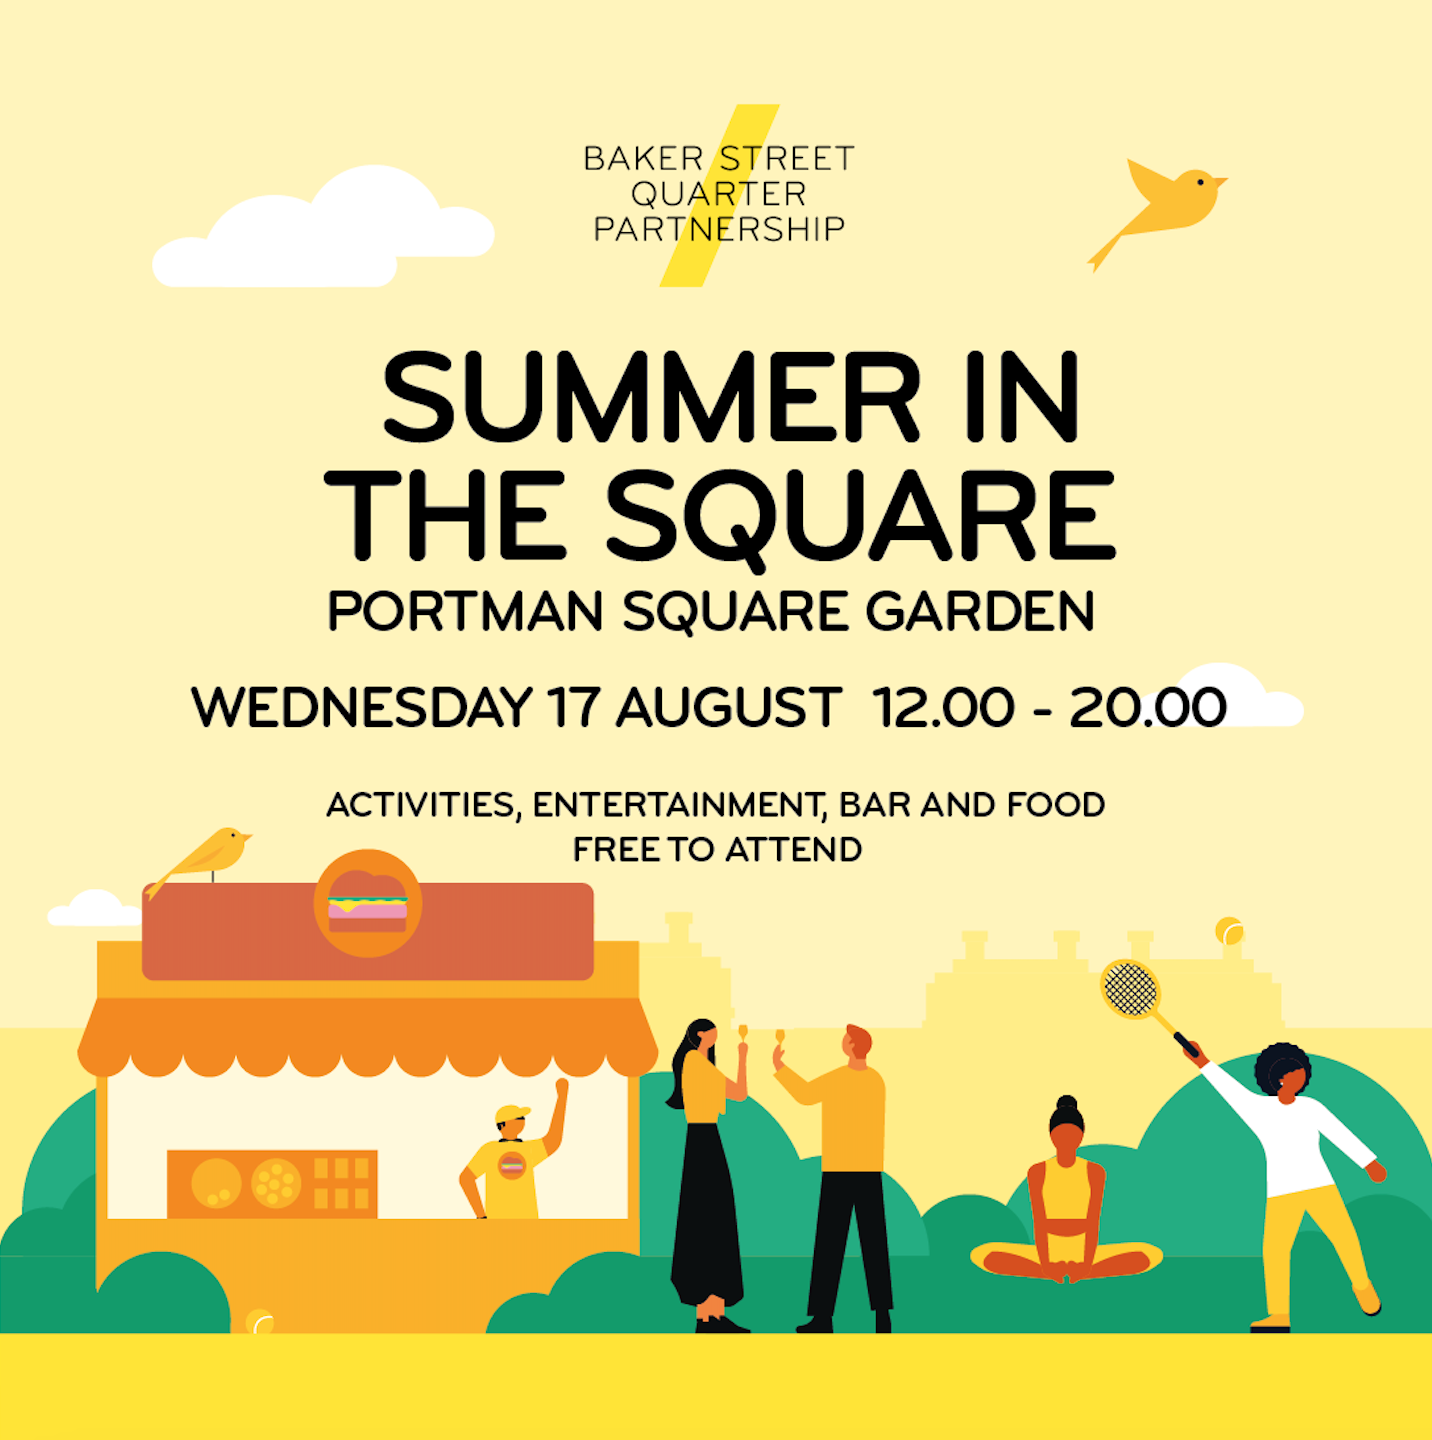 An online advertisement for Summer in the Square at Portman Square Gardens